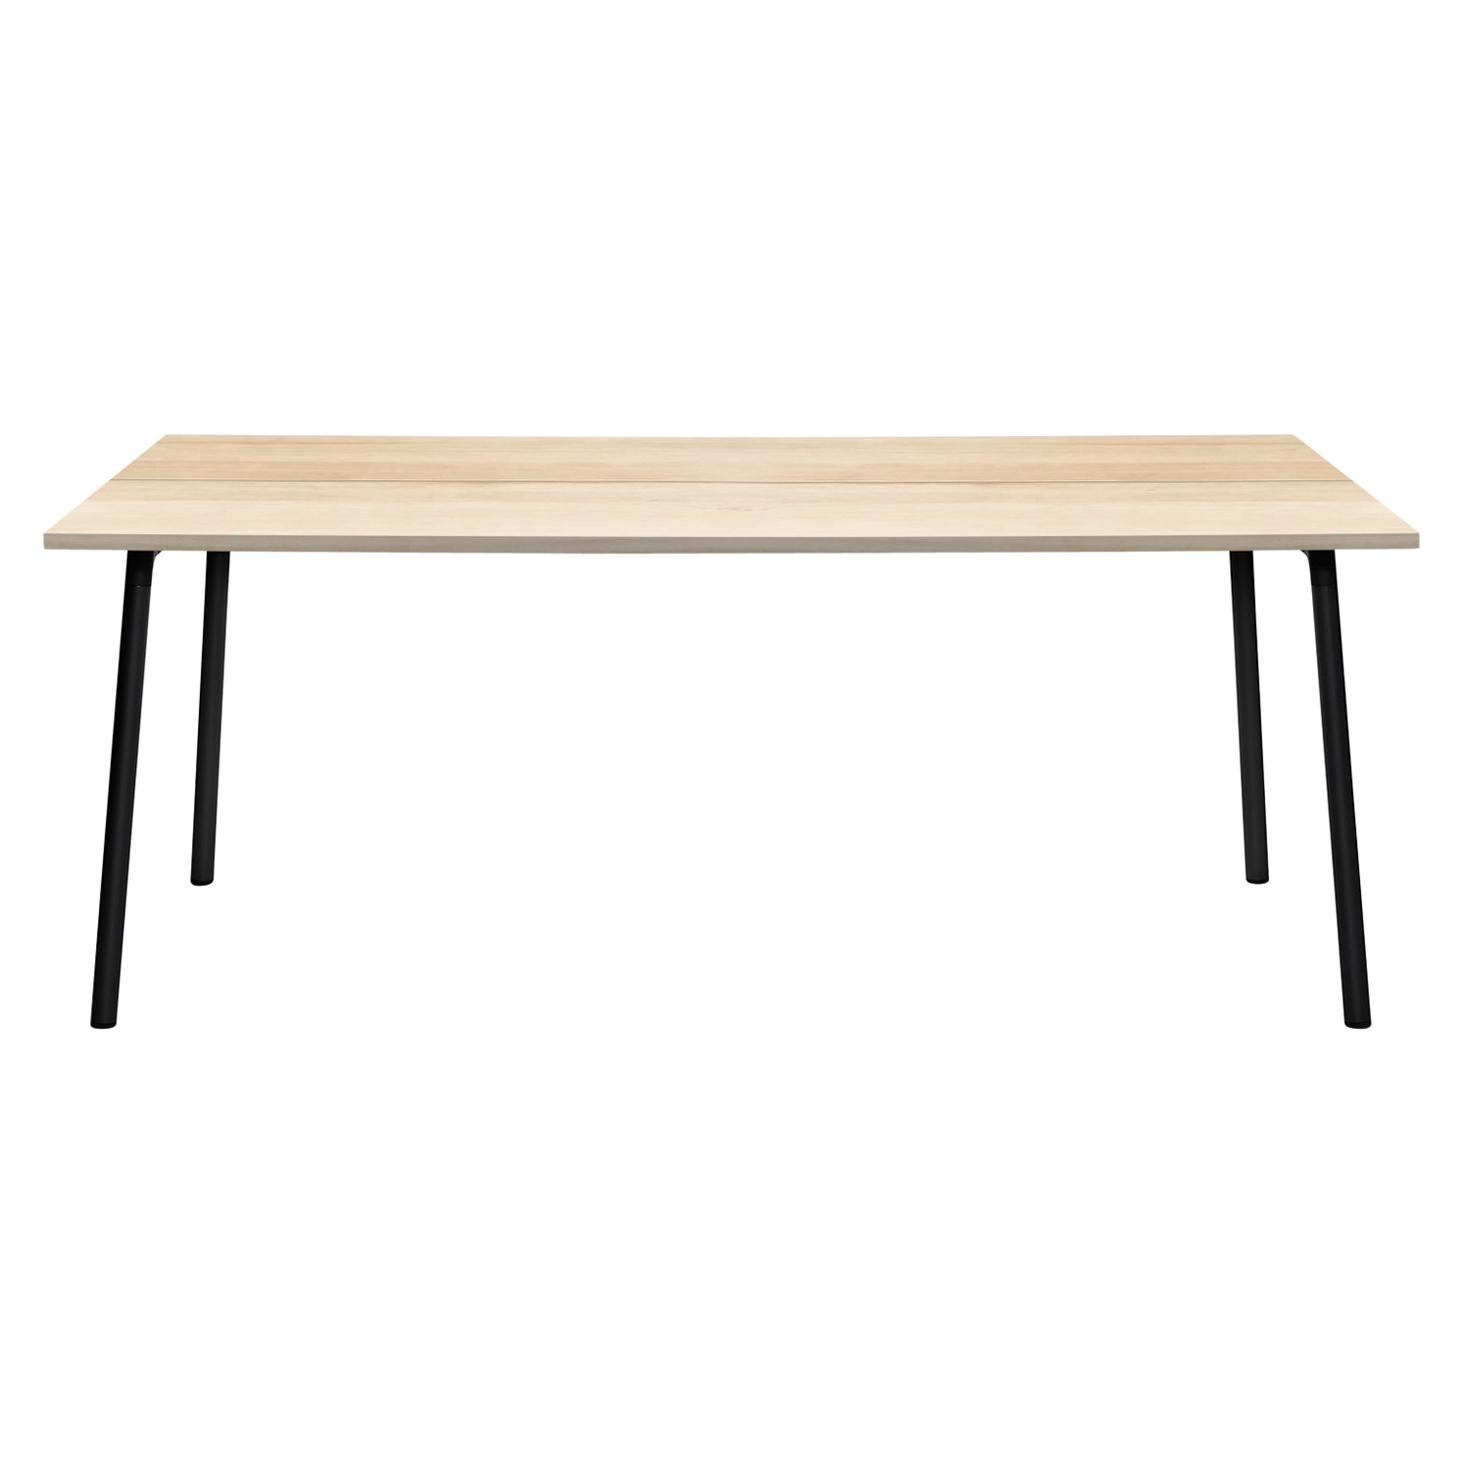 Emeco Run 72" Table with Black Frame & Wood Top by Sam Hecht and Kim Colin For Sale